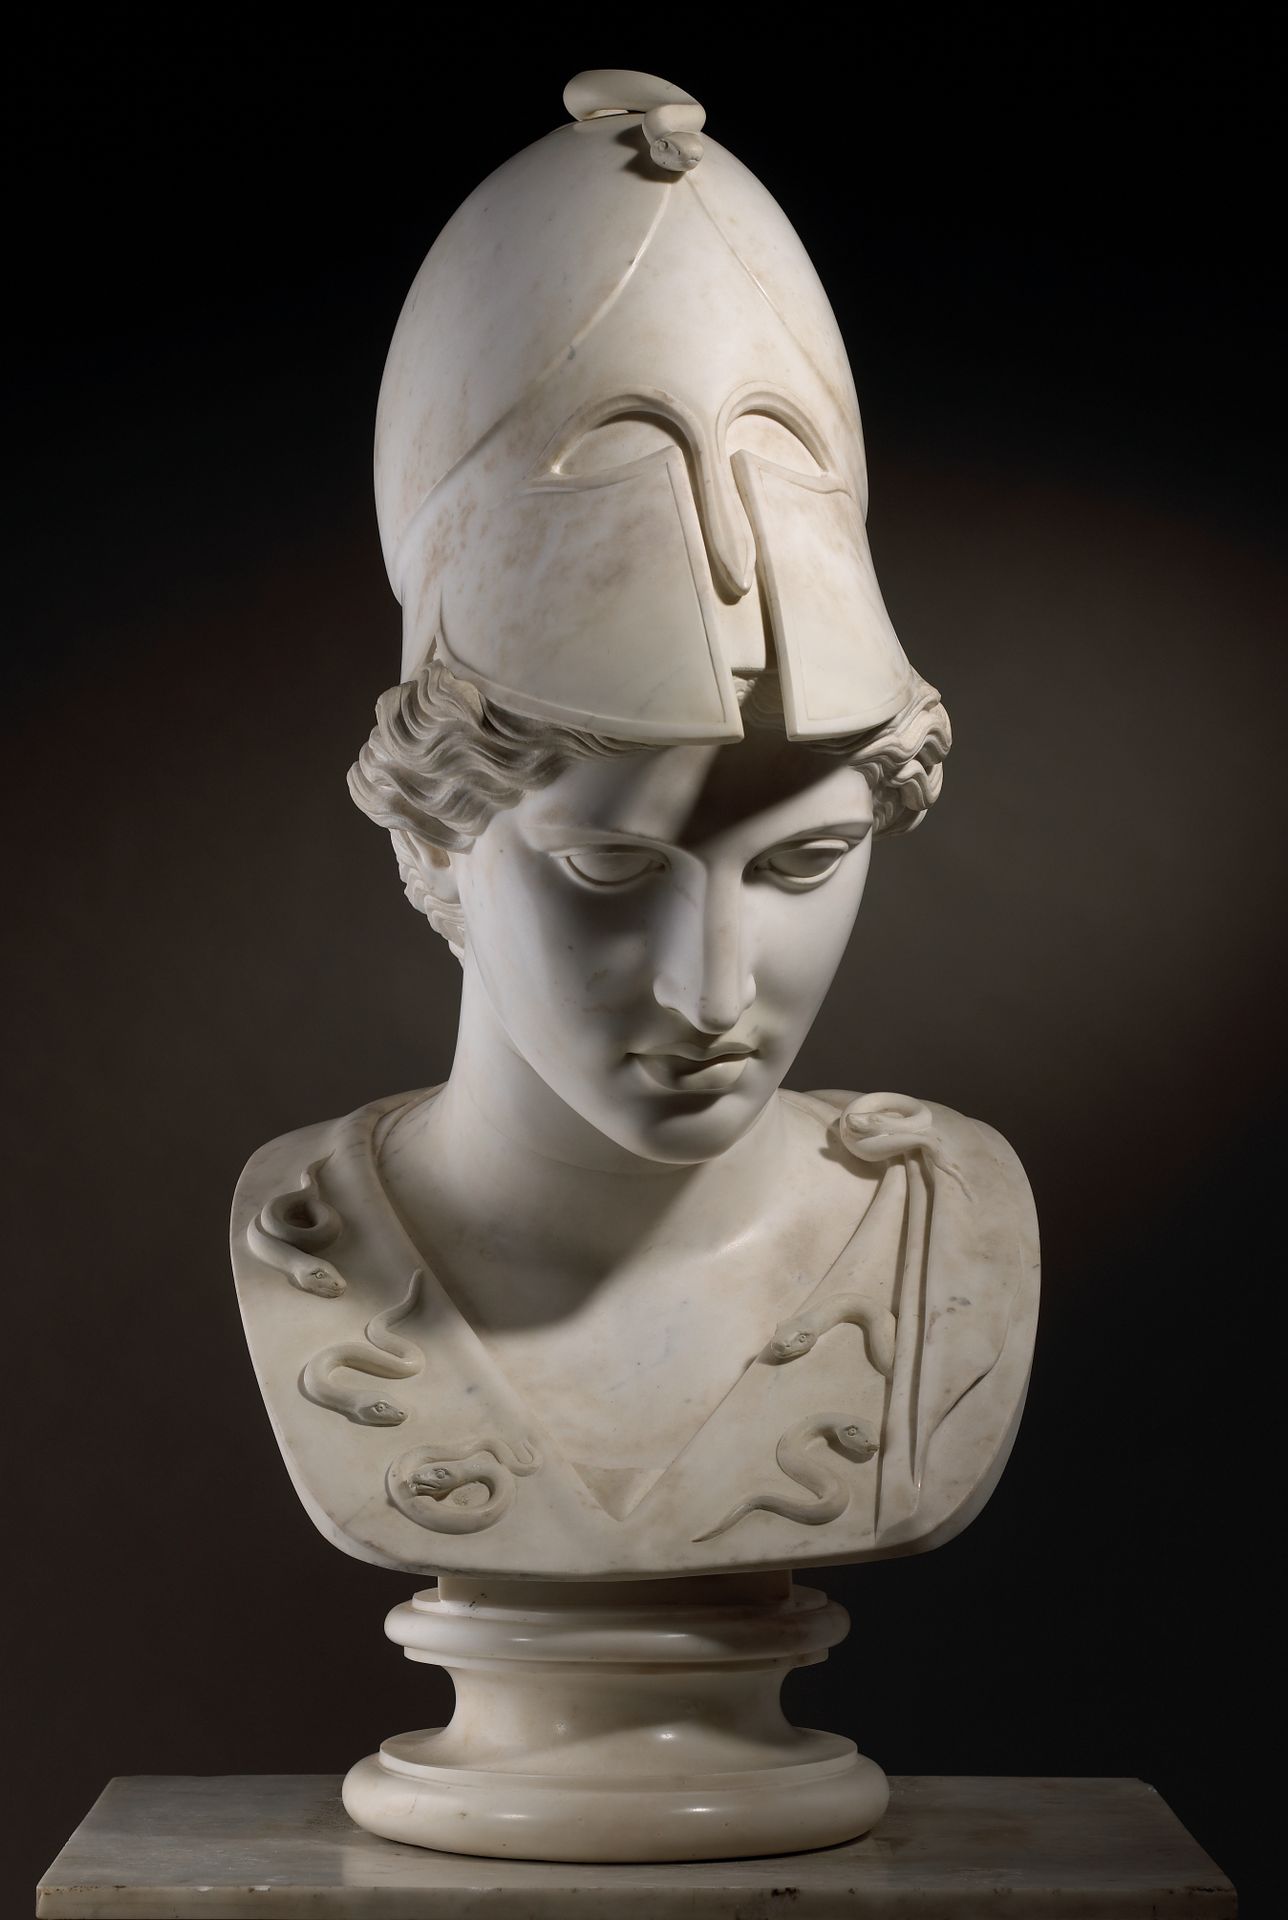 Null BUST OF ATHENA PALLAS OF THE VELLETRI TYPE

Late 18th - early 19th century
&hellip;